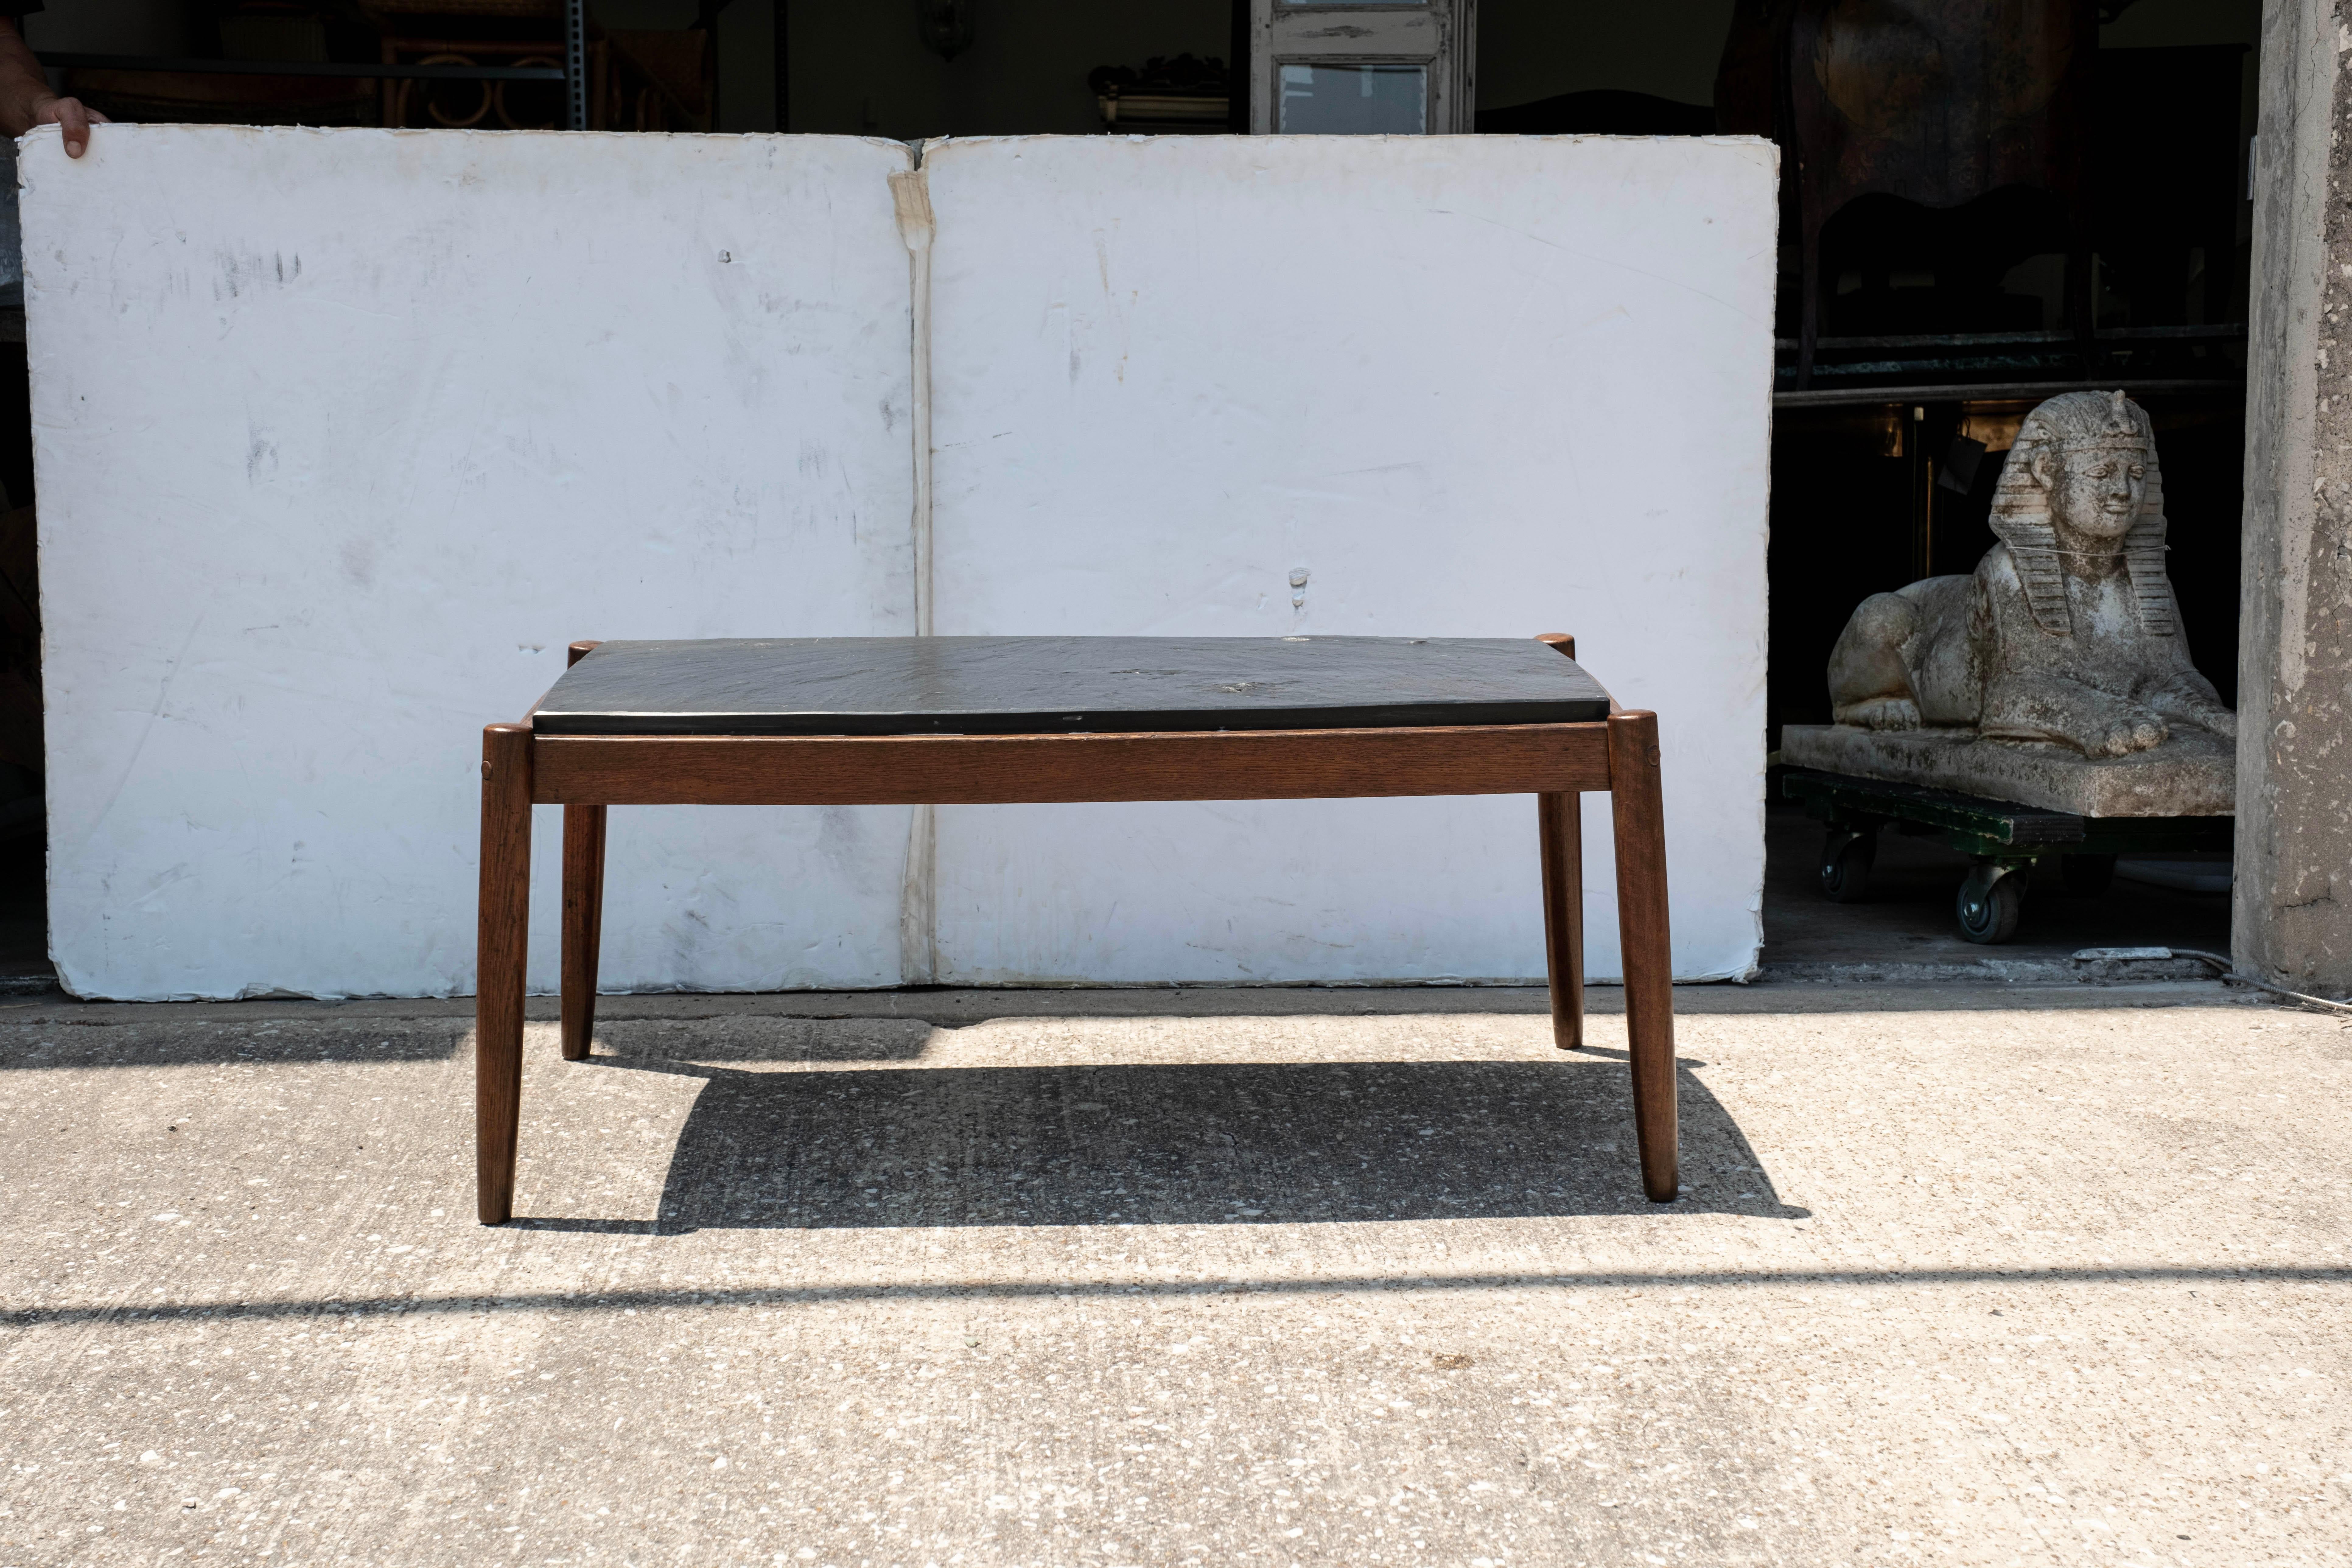 French Brutalist Walnut Coffee Table With Slate Top.
Our handsome French mid century Pierre Chapo style Brutalist rectangular cocktail table is stunning from every angle and will work in many different interiors.
Slate top is original to the table.